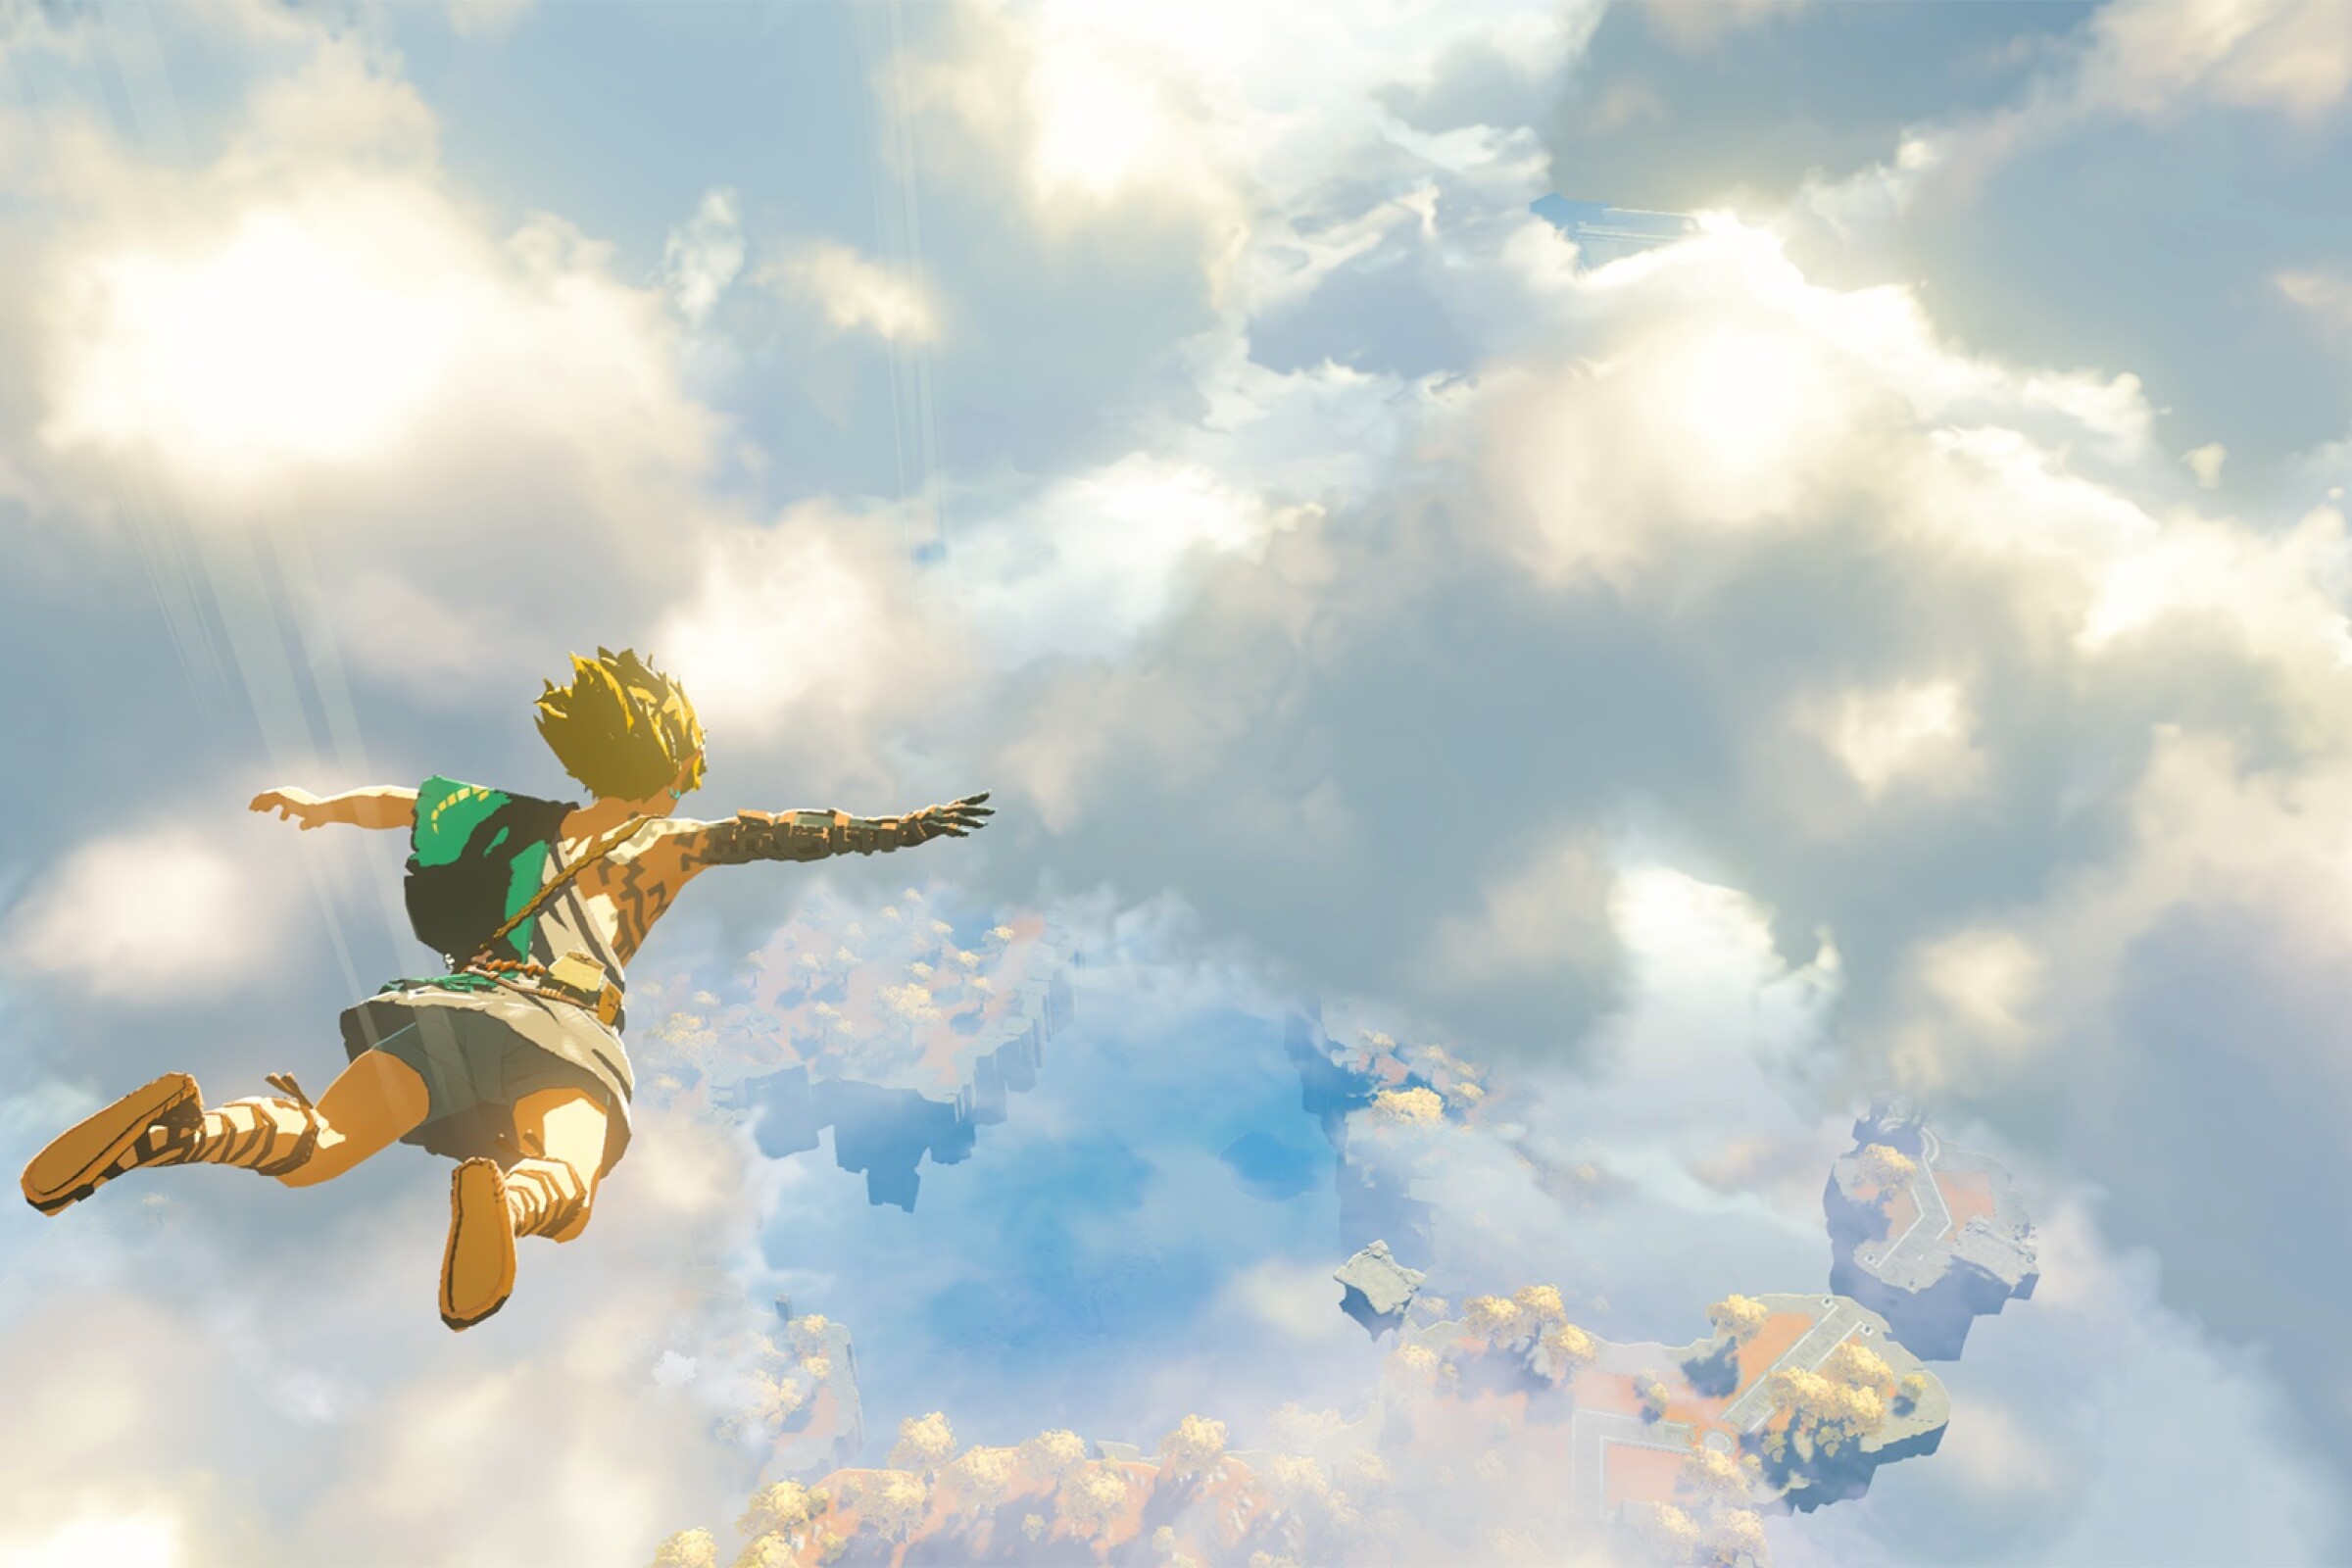 The sequel to "Breath of the Wild" will take place partly in a kingdom in the sky.